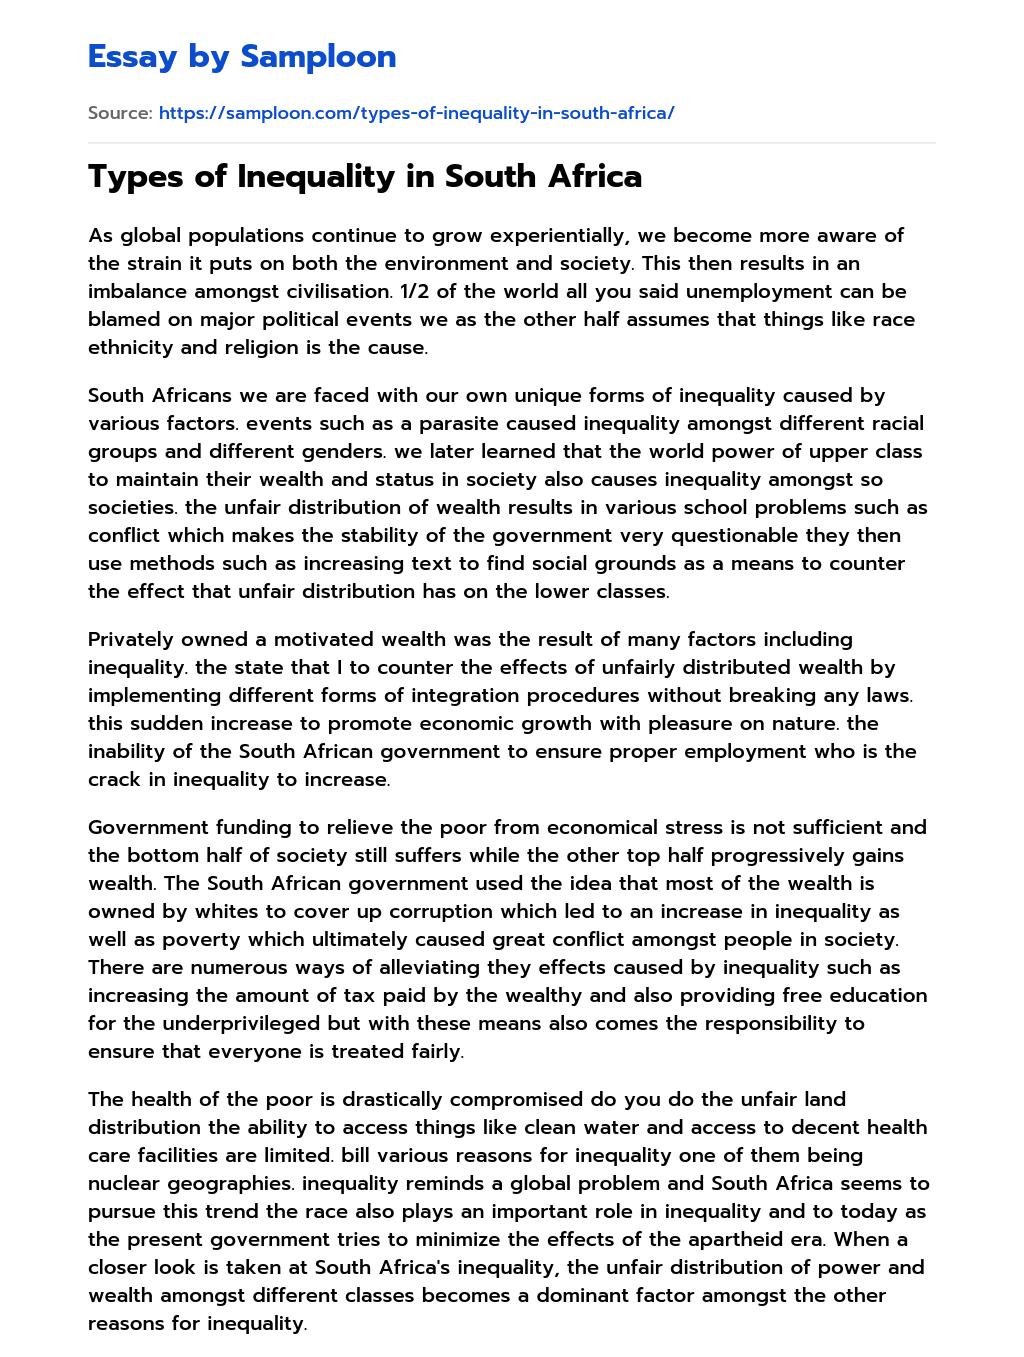 Types of Inequality in South Africa essay